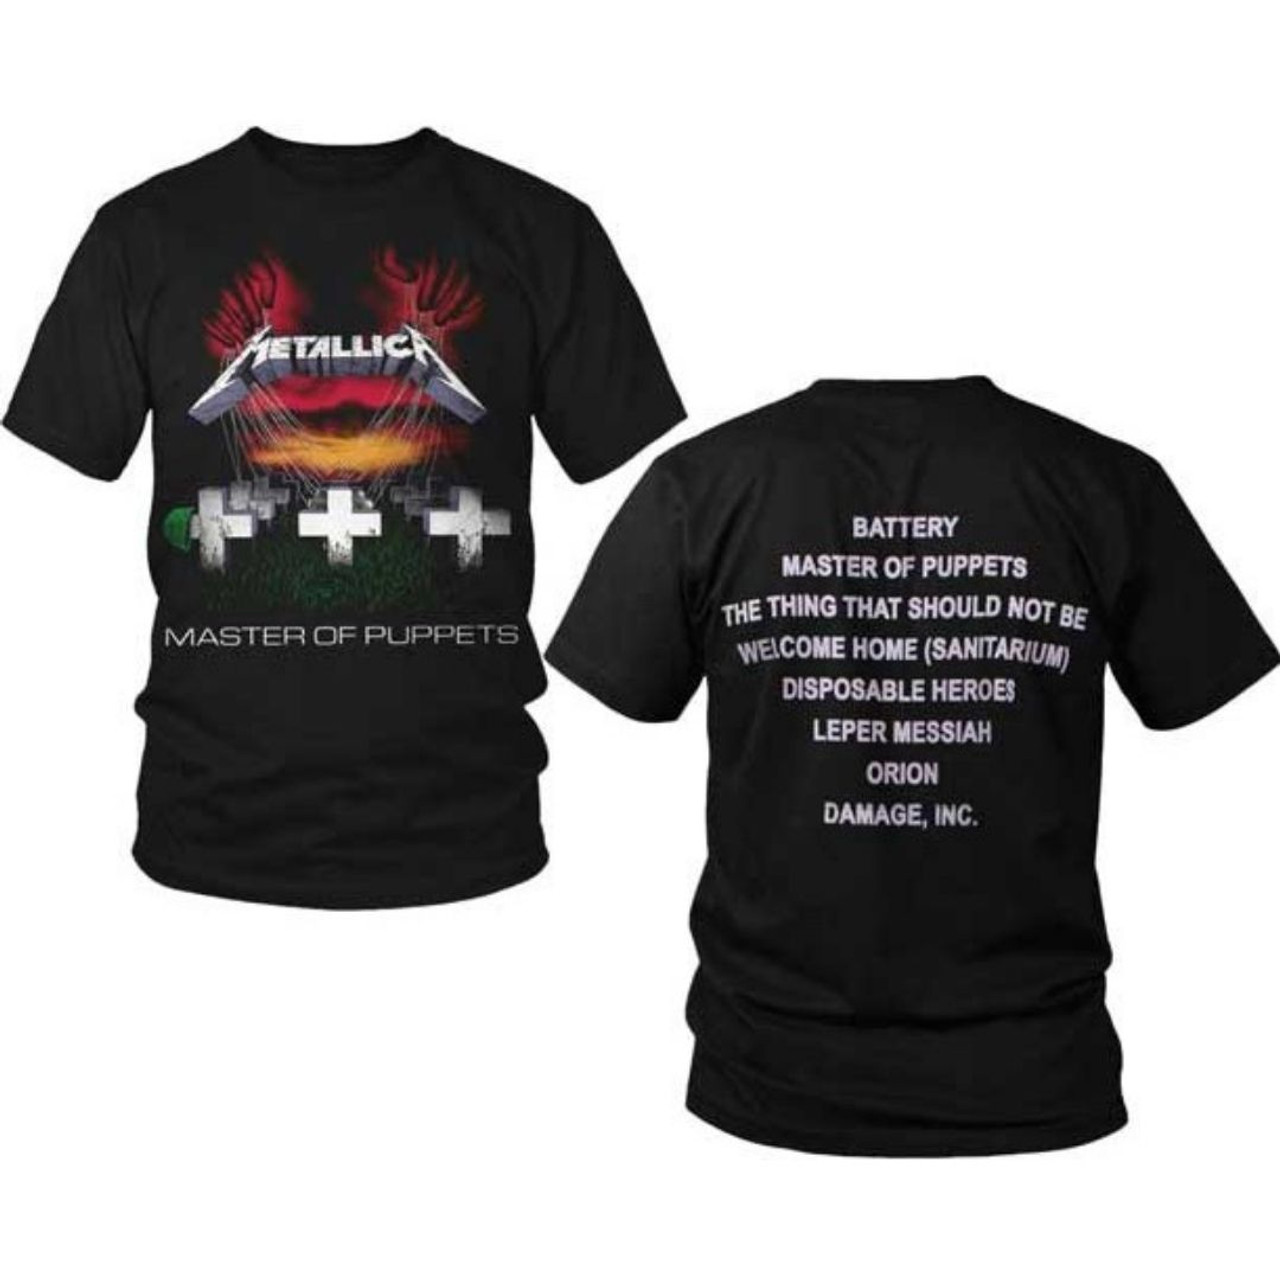 Metallica Master of Puppets Album Cover with Song Titles Men's T-shirt